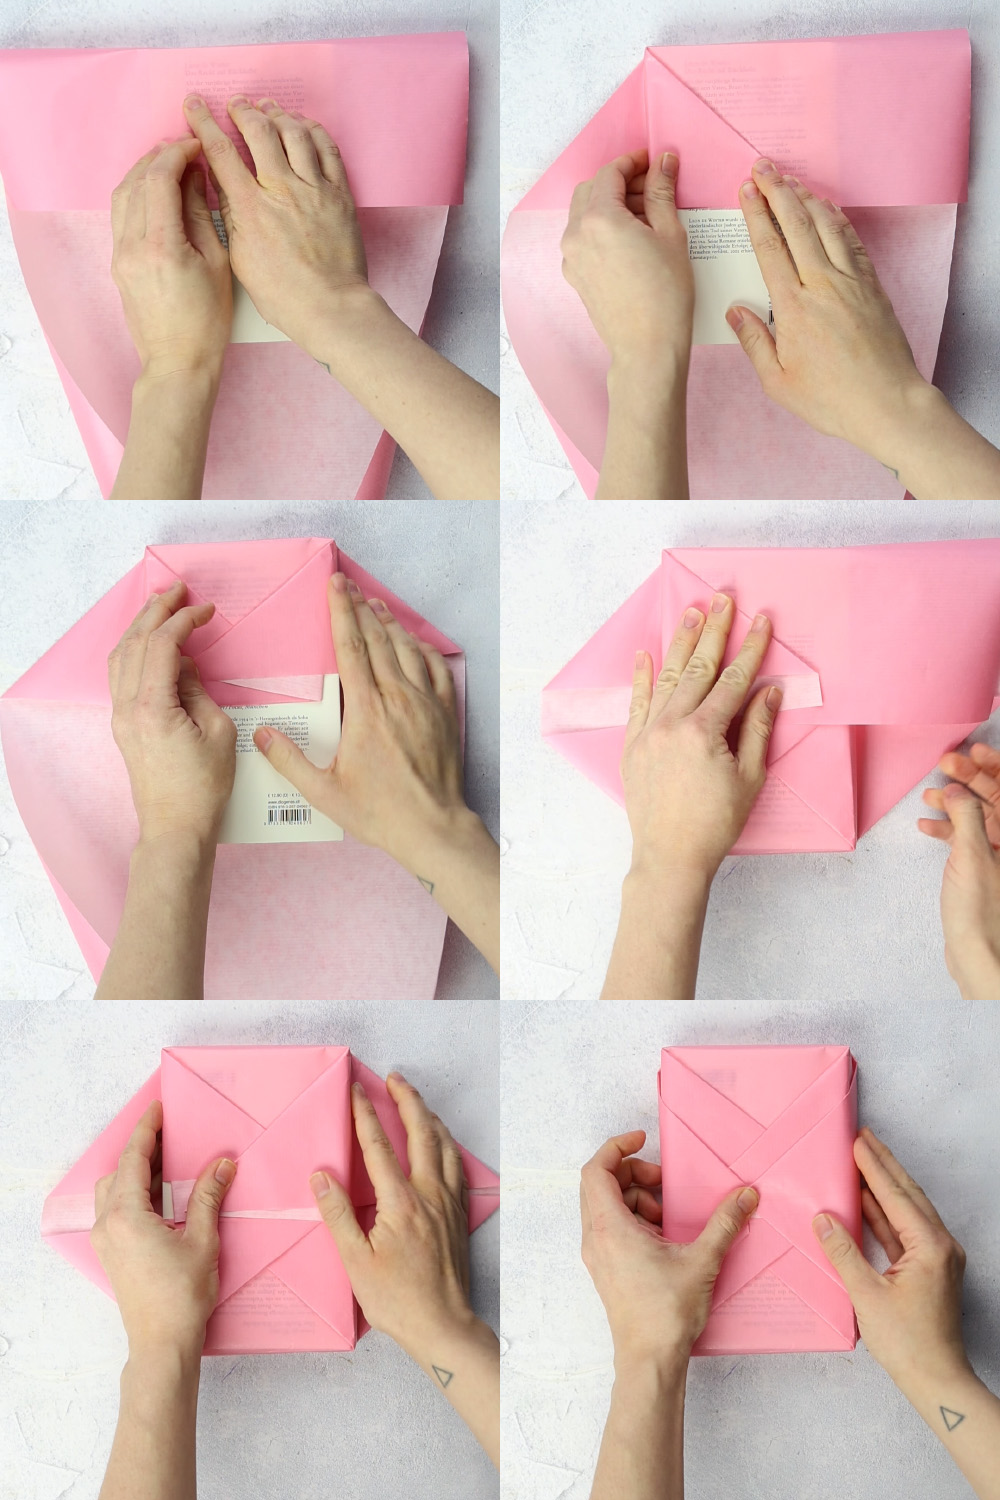 Wrapping gifts using special folding technology